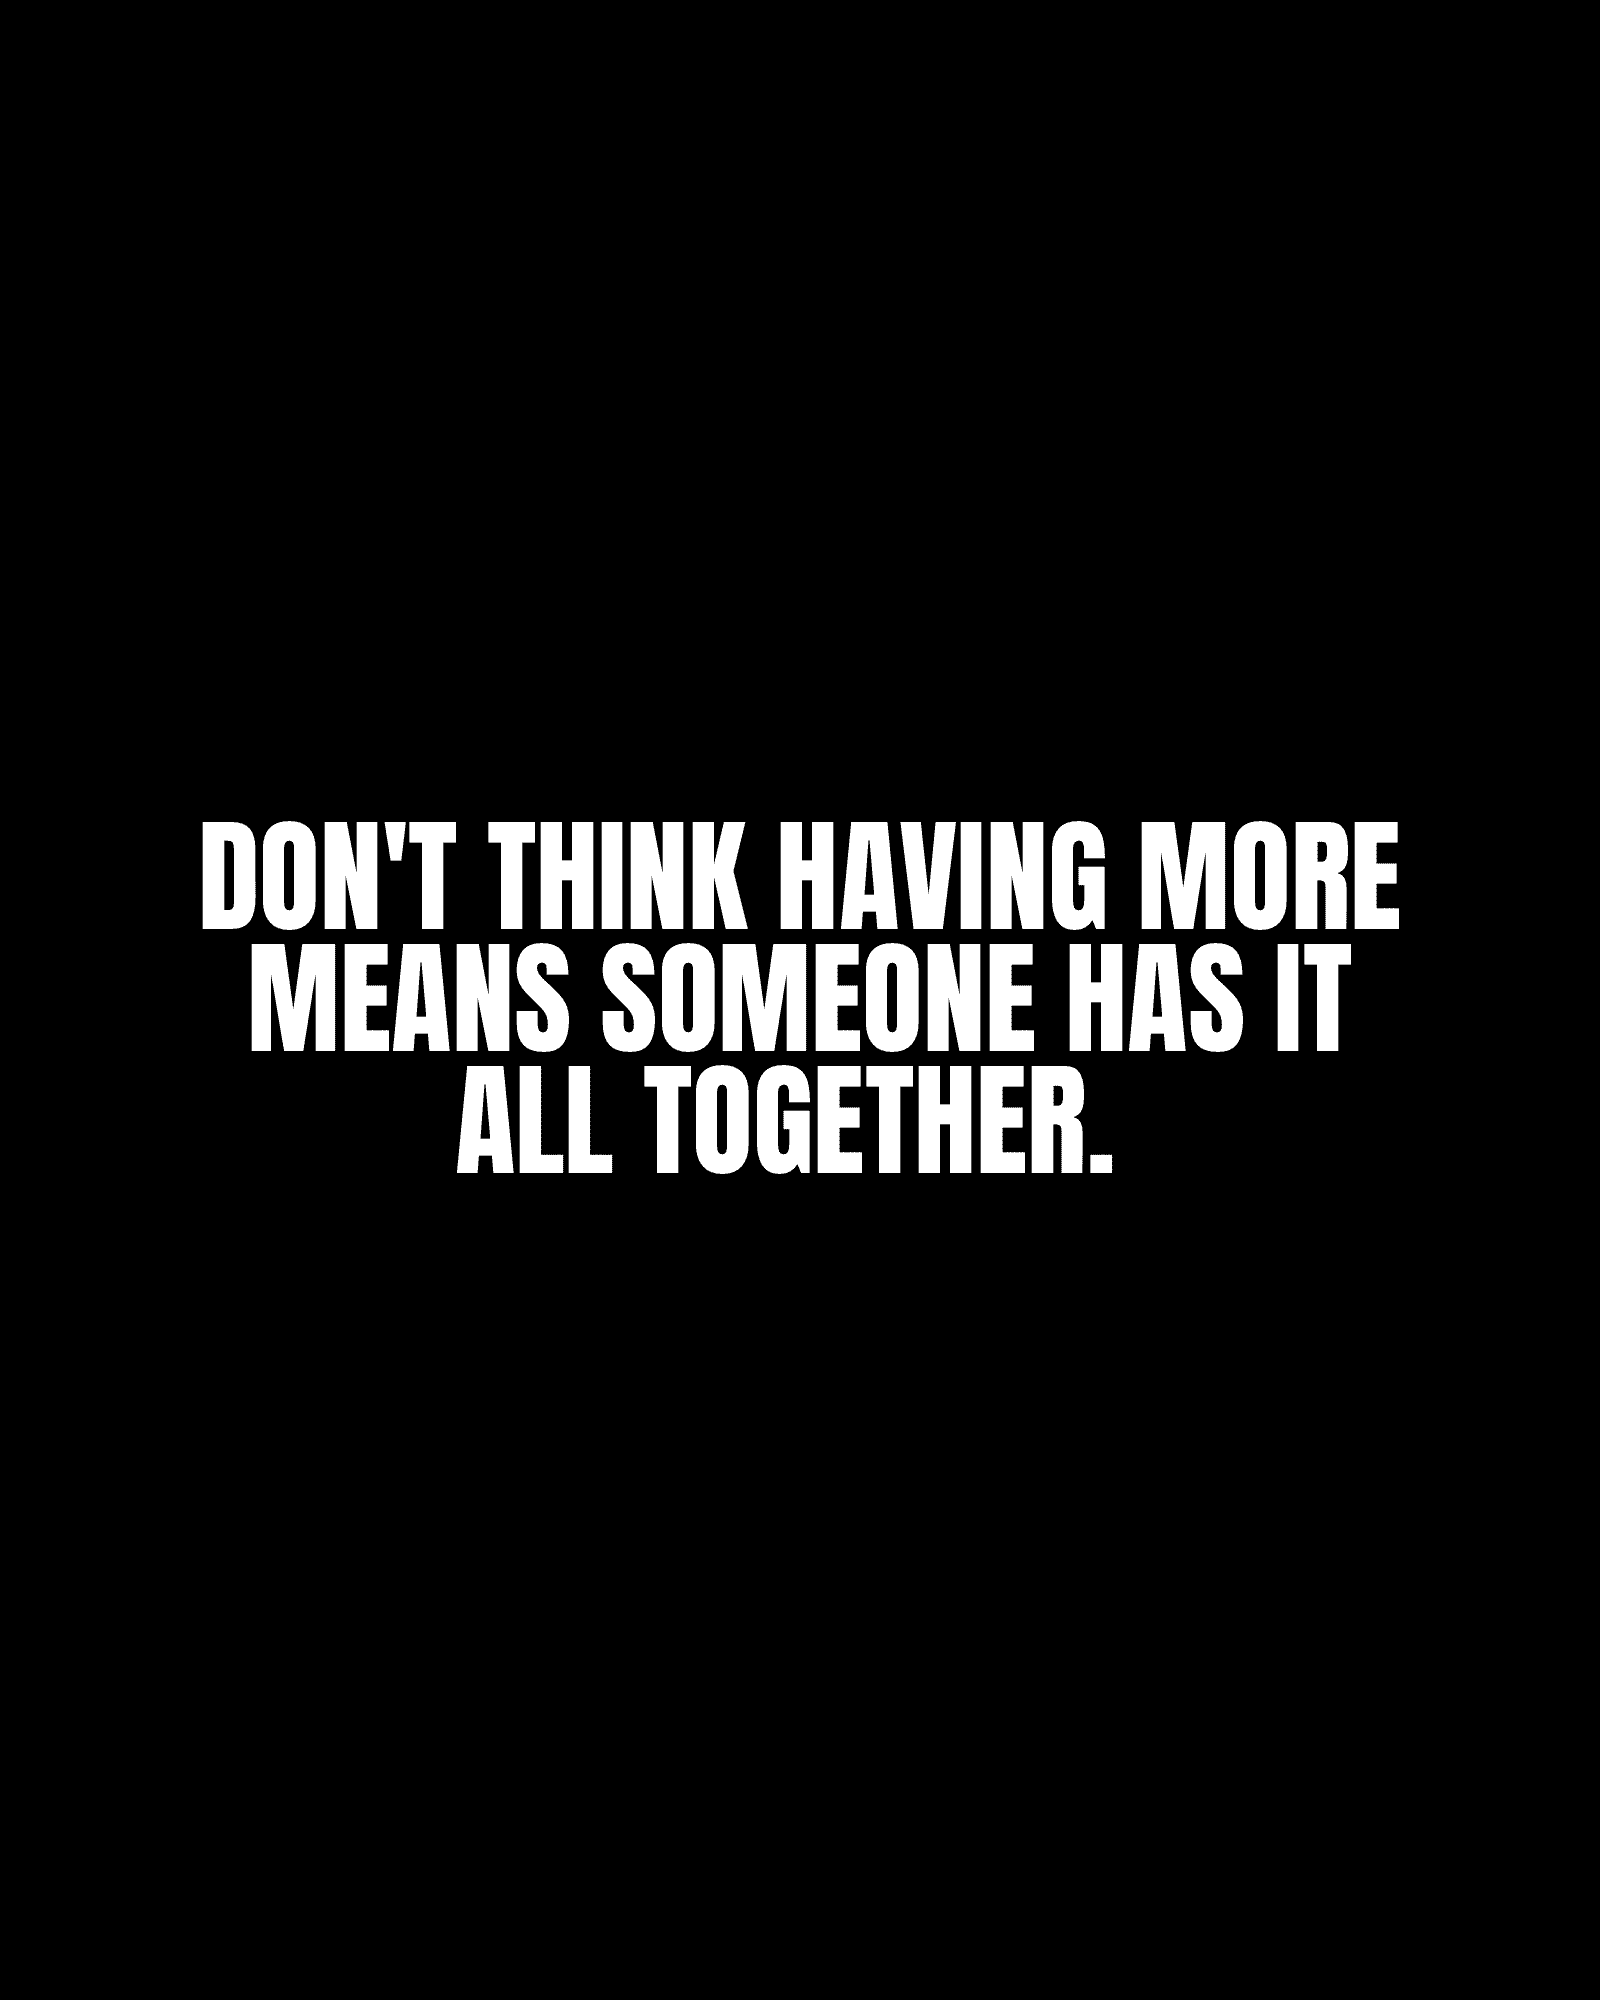 Don’t think having more means someone has it all together.